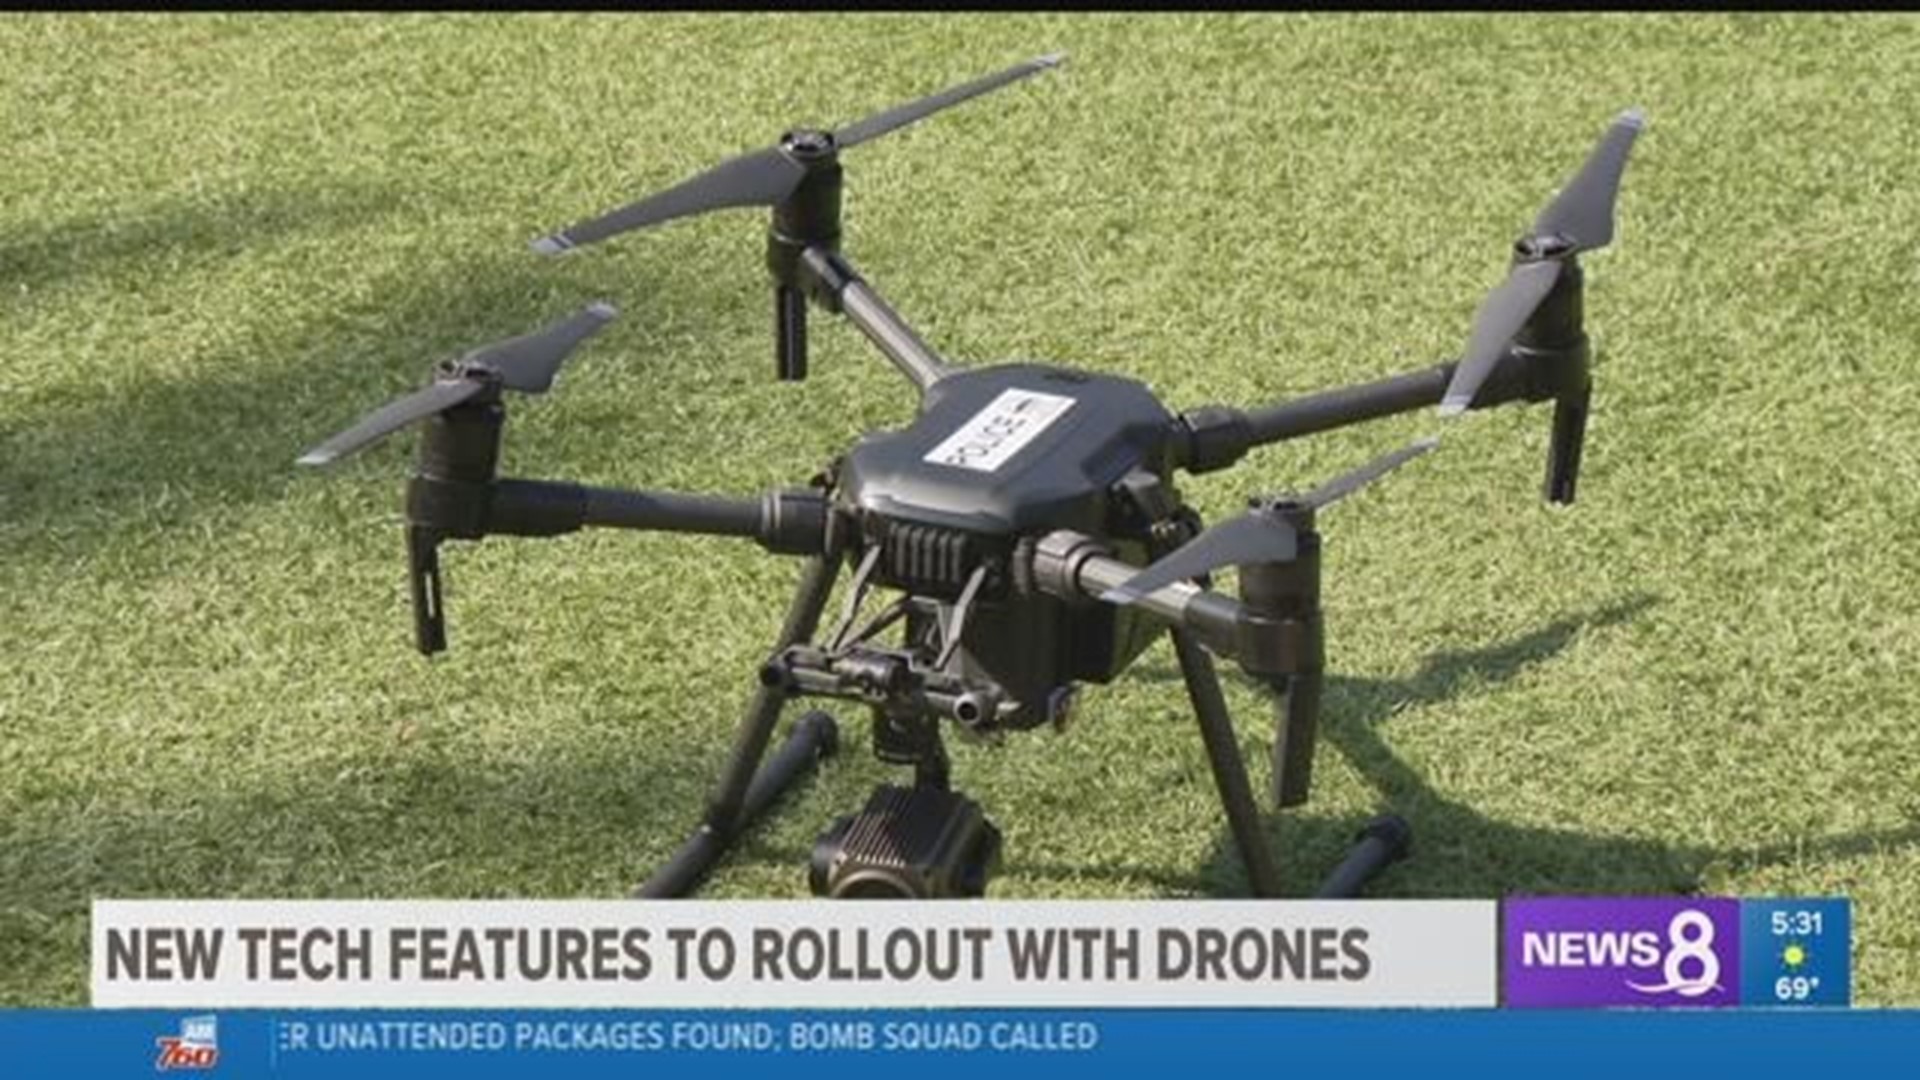 Chula Vista Police Department Will Use Drones As First Responders